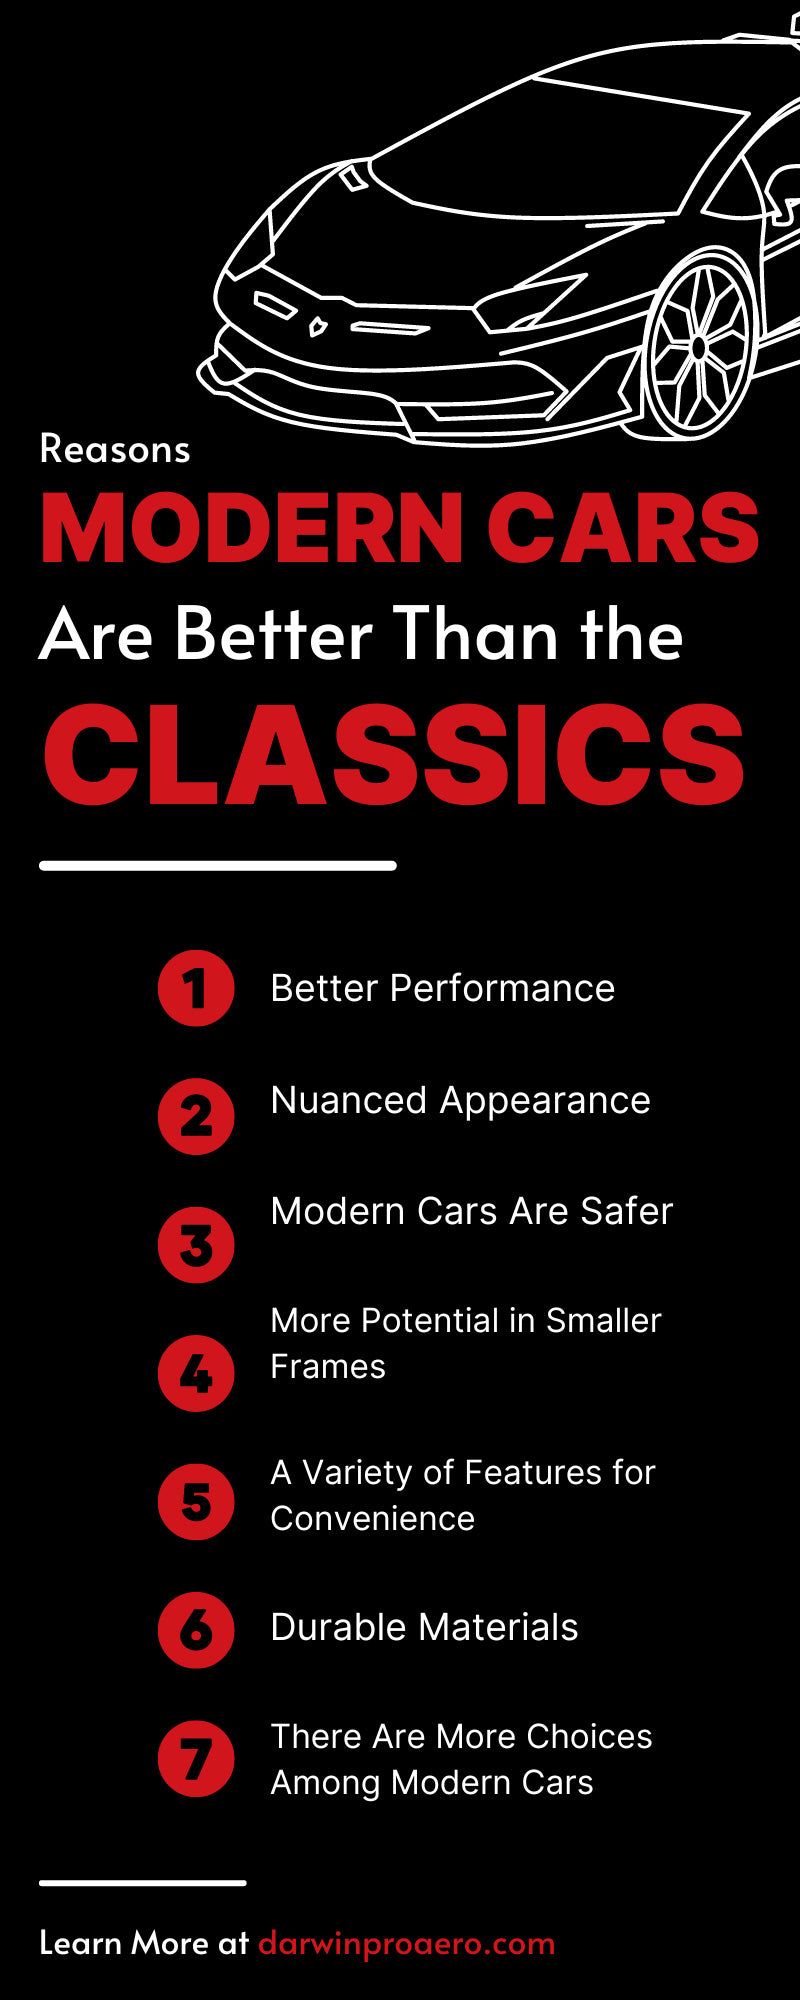 10 Reasons Modern Cars Are Better Than the Classics